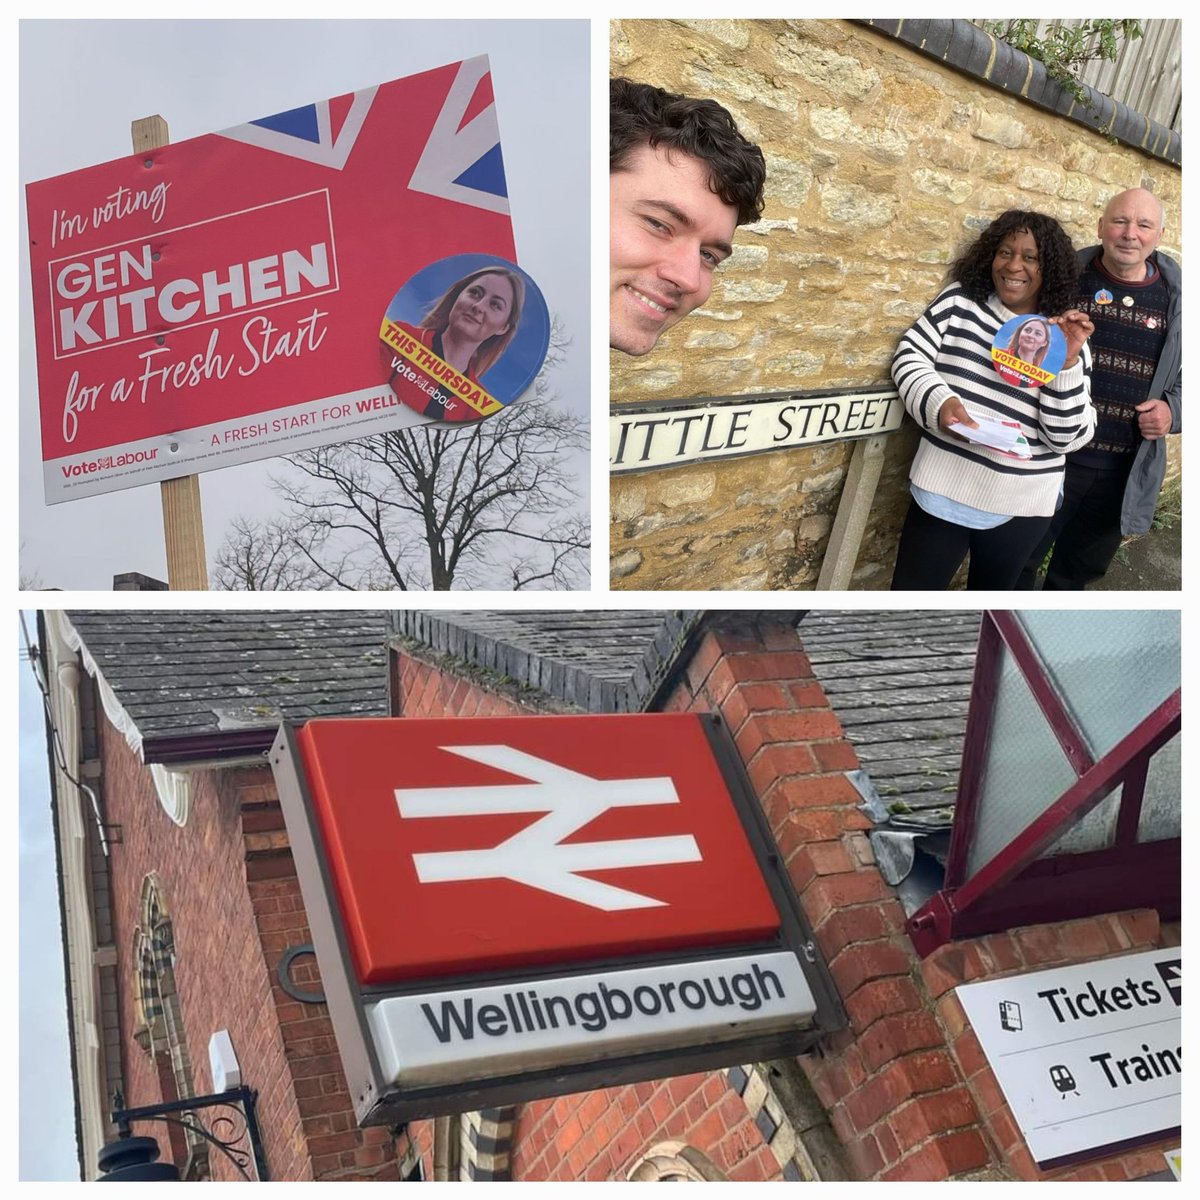 A great day out with the #Broxtowe team, activists from across the country working to #GOTV to get @Gvkitchen over the line. Still a few hours to go #VoteLabour #WellingboroughByElection